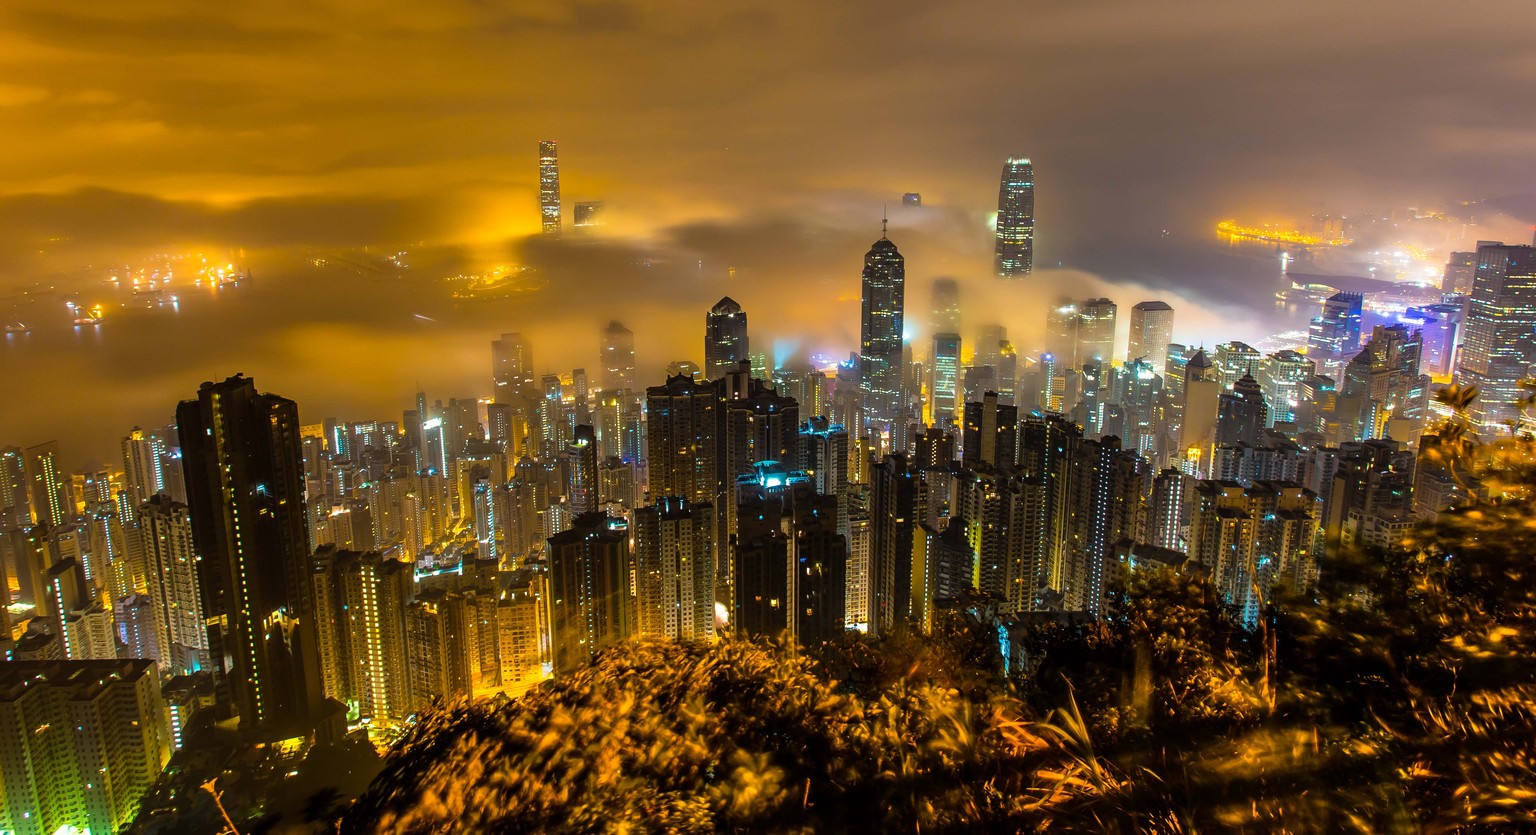 PIC FROM KWAN SIMON / CATERS NEWS - (PICTURED: The incredible city scape of Hong Kong taken from The Peak ) - It might look like this is a city floating on clouds - but these incredible photos actuall ...